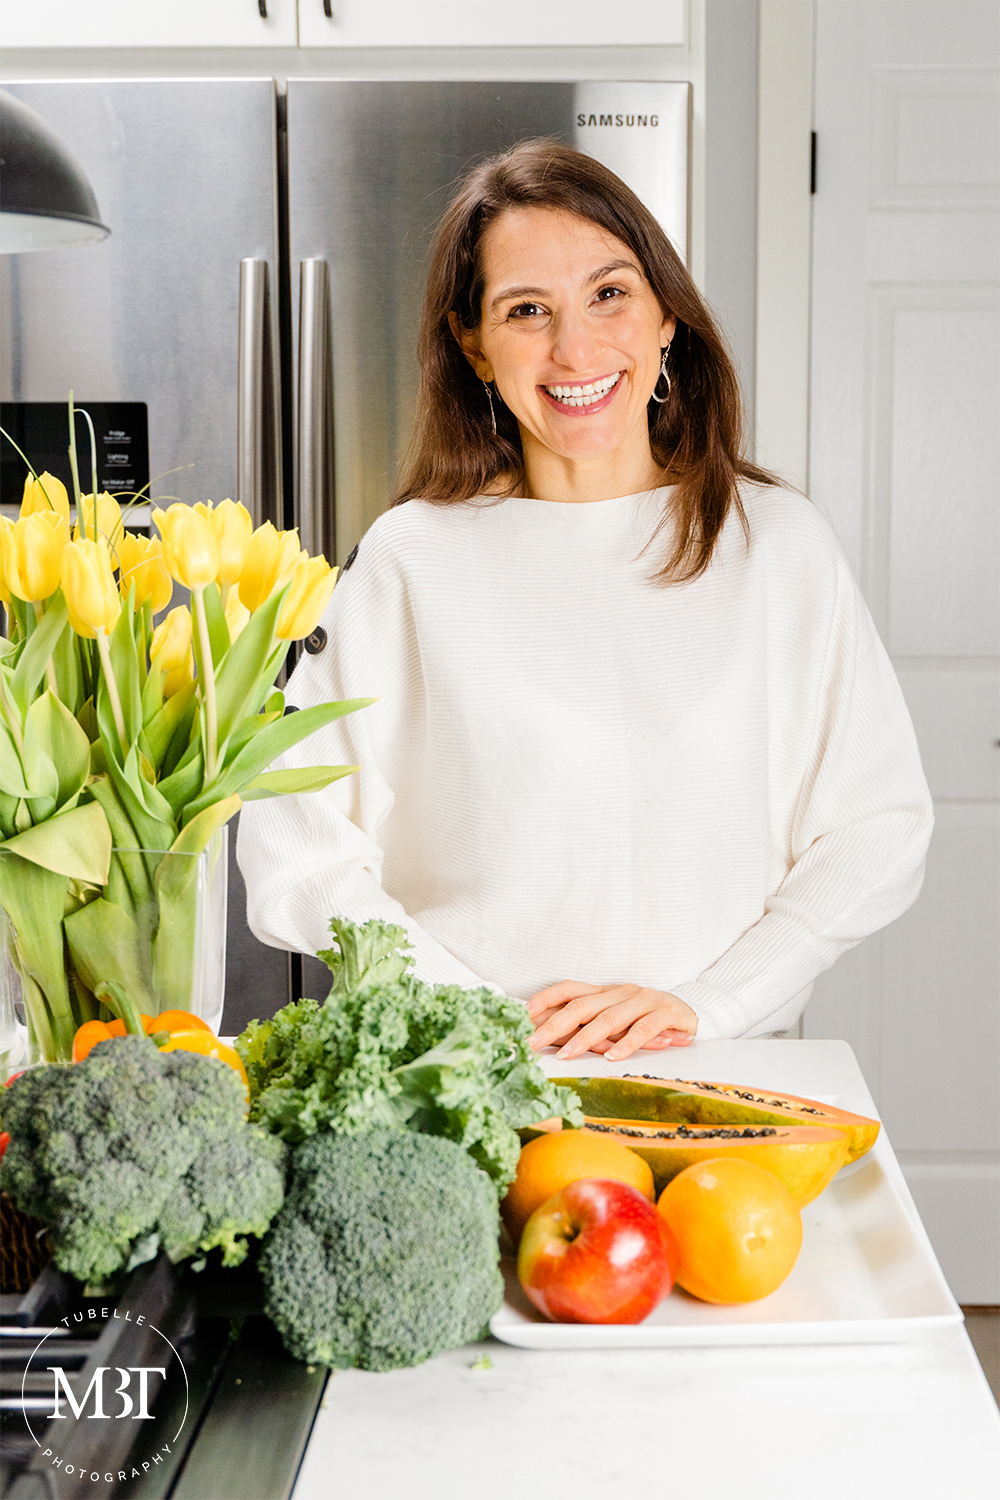 branding session - life coach in her kitchen surrounded by vegetables and fruits, taken in Northern Virginia by a lifestyle photographer in Washington, DC